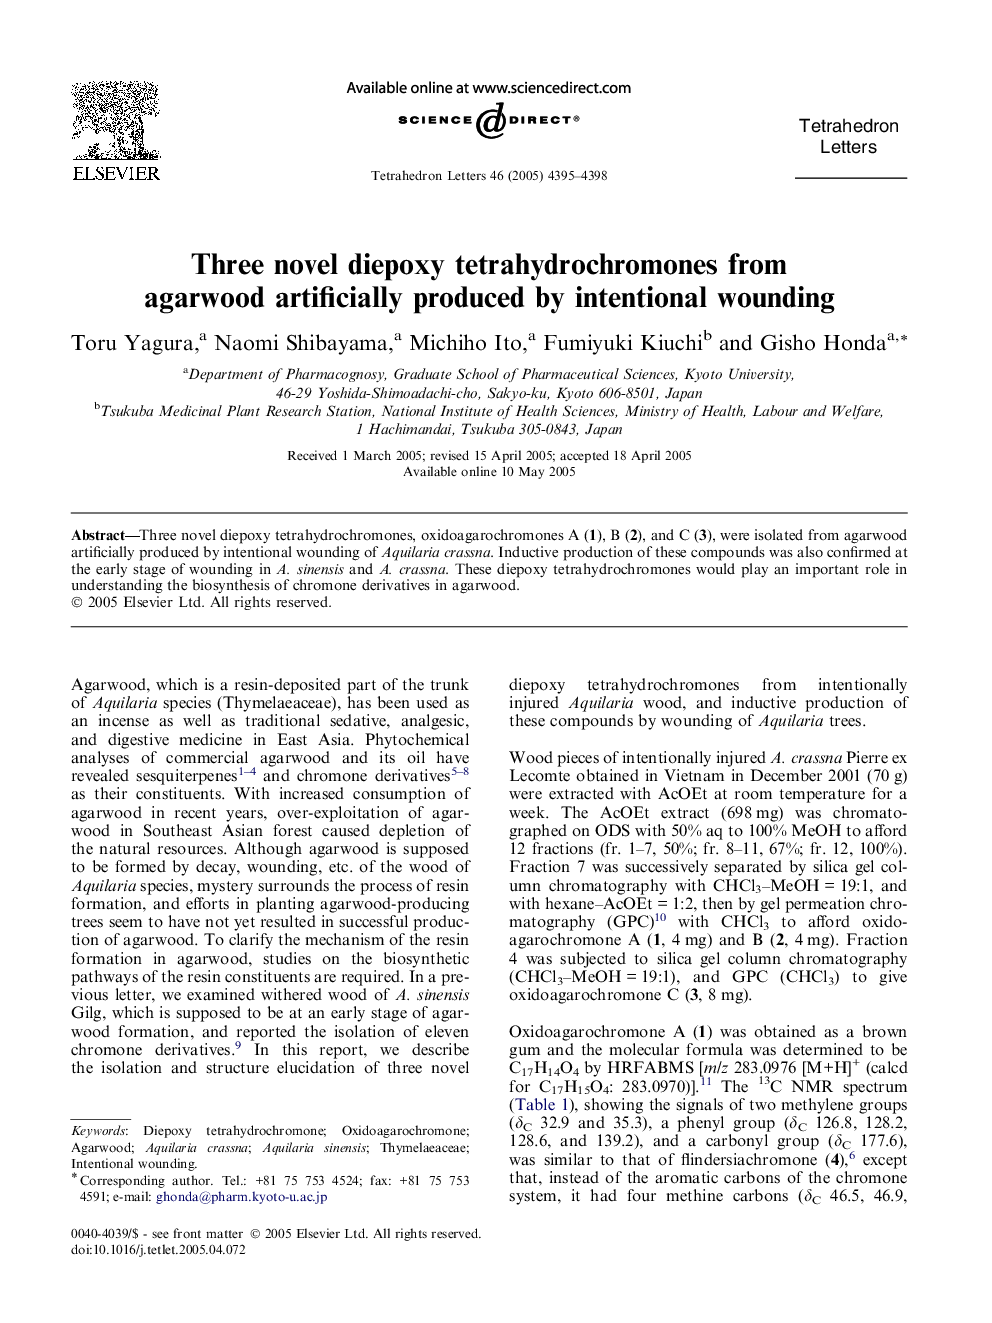 Three novel diepoxy tetrahydrochromones from agarwood artificially produced by intentional wounding